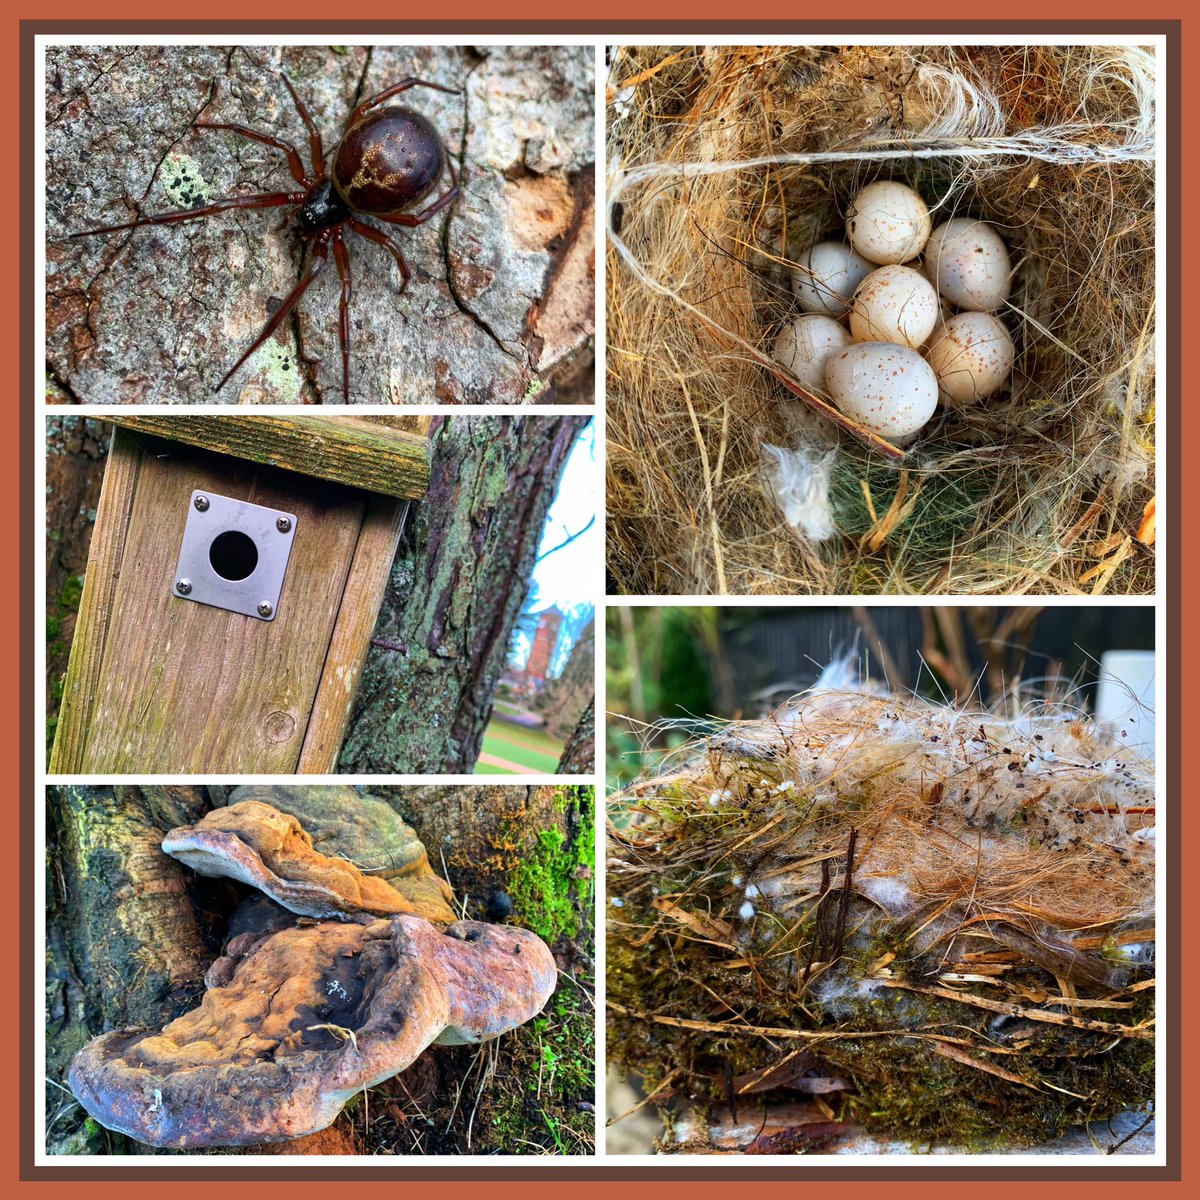 Found some interesting stuff while clearing out bird boxes today. A noble fasle widow spider, an abandoned blue tits (I think) nest and some bracket fungus. Hope everyone stayed warm today? #GardeningX #GardeningTwitter #UKWildlife #Ecology #Spider #wildlifephotography